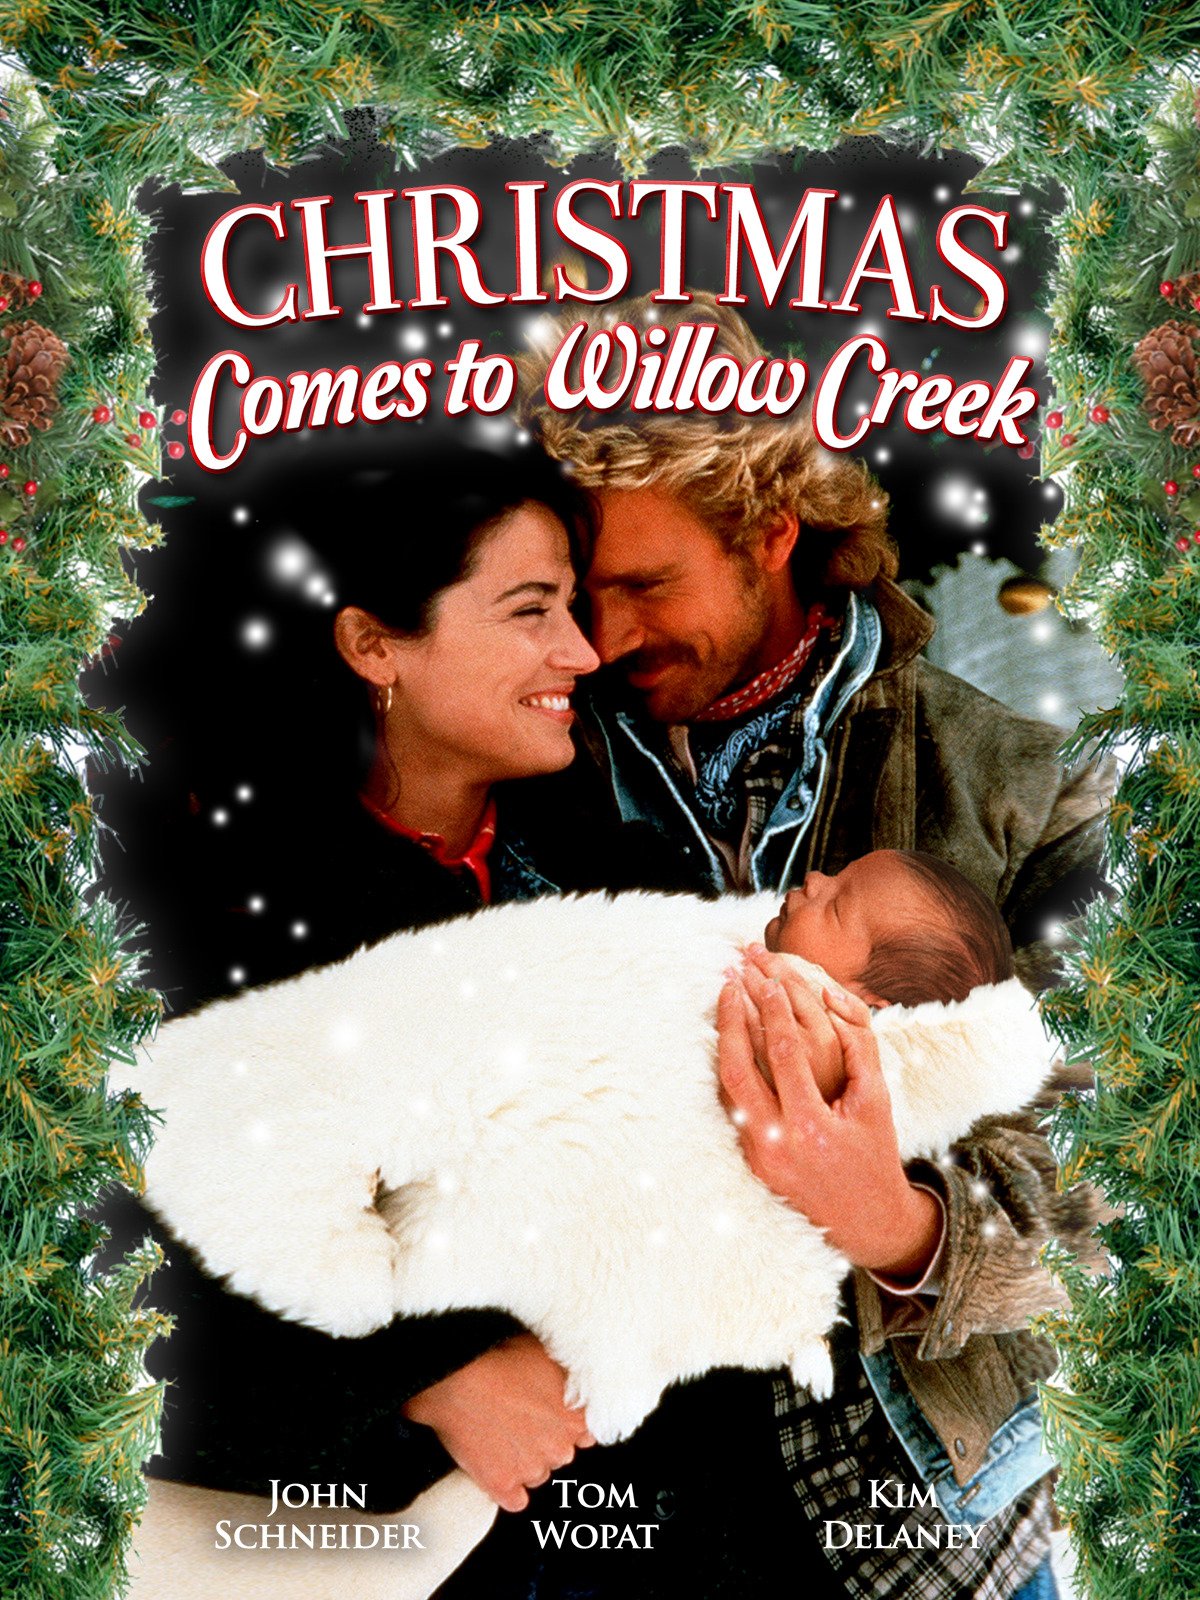 https://storage.googleapis.com/accesswire/media/673921/christmas-comes-to-willow-creek-poster.jpg